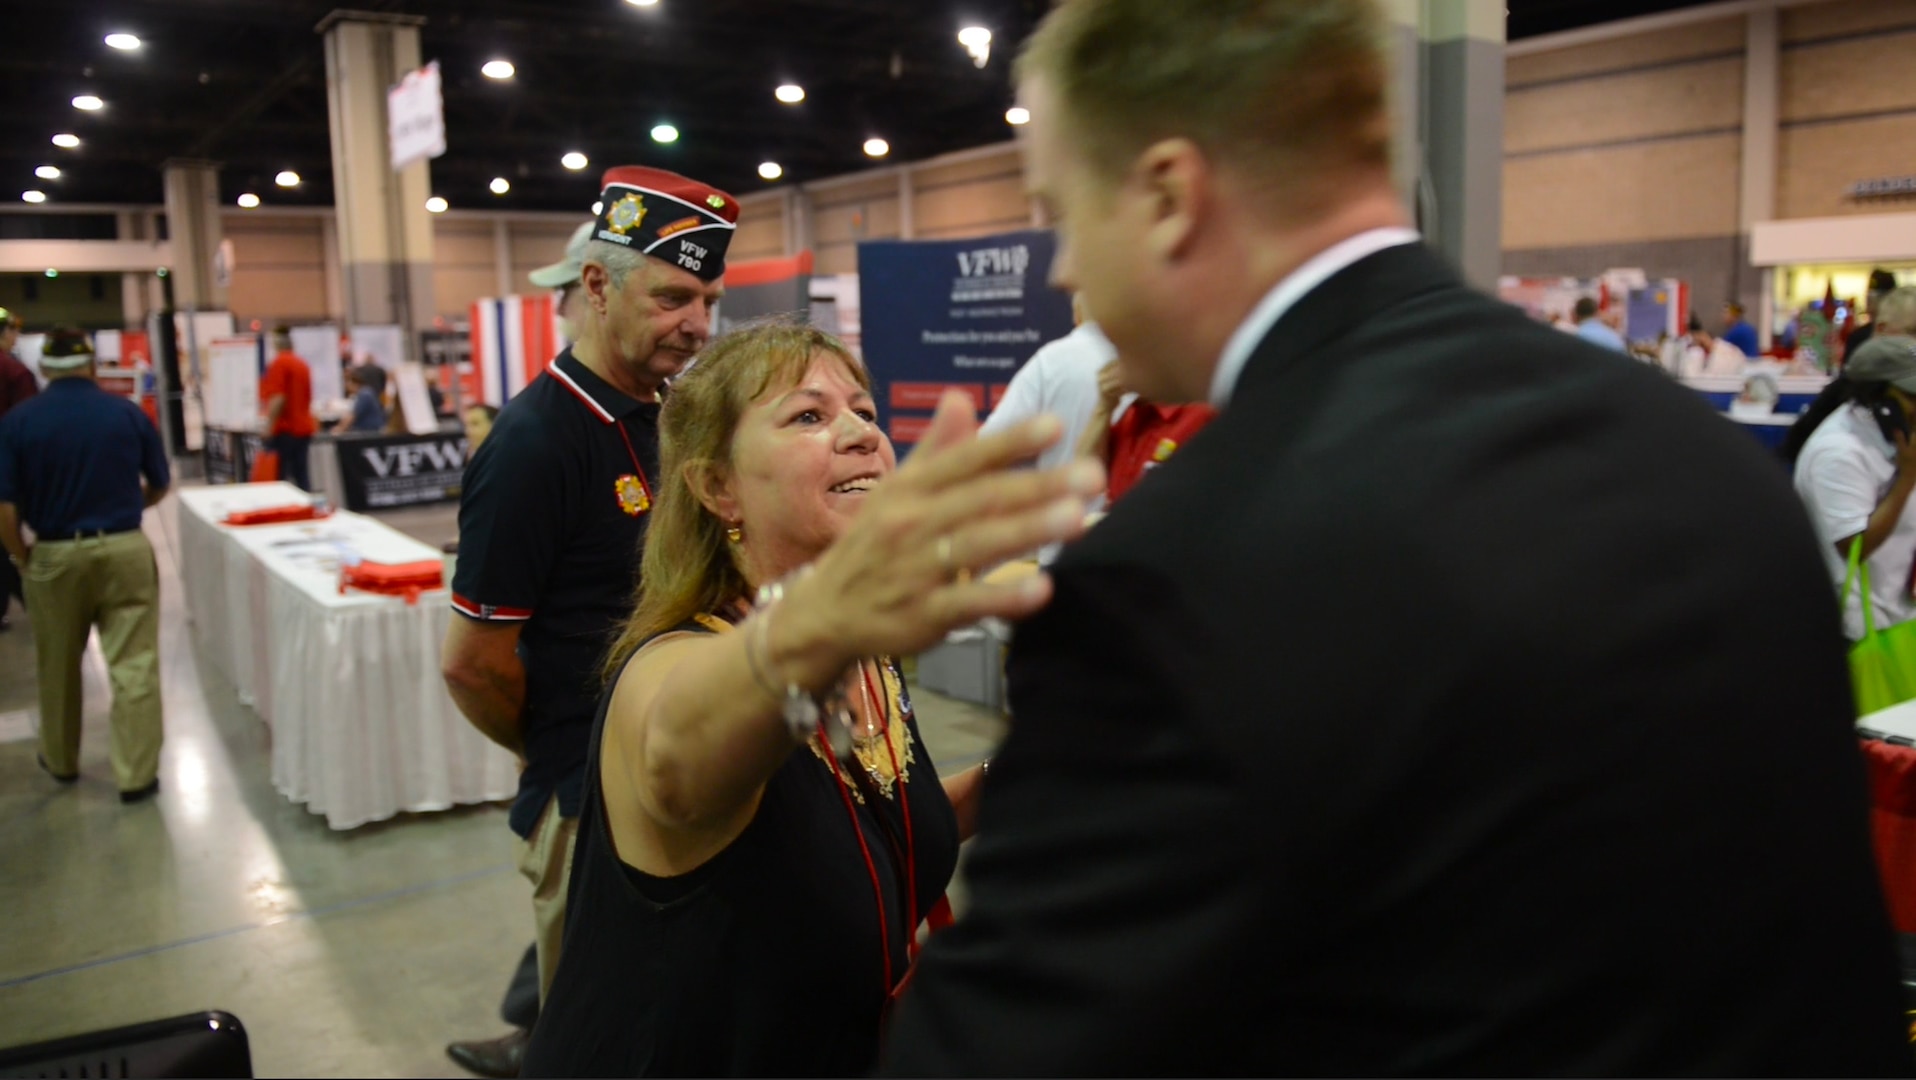 A grateful woman hugs U.S. Navy Lt. Thomas Sloan, a member of the Defense POW/MIA accounting agency (DPAA) at DPAA's booth during the Veterans of Foreign Wars Convention held at the Charlotte, North Carolina Convention Center July 23, 2016. She thanked him for his service and DPAA's mission. The mission of the Defense POW/MIA Accounting Agency is to provide the fullest possible accounting for our missing personnel to their families and the nation. (Photo by U.S. Army Sgt. Tiffany Fudge)